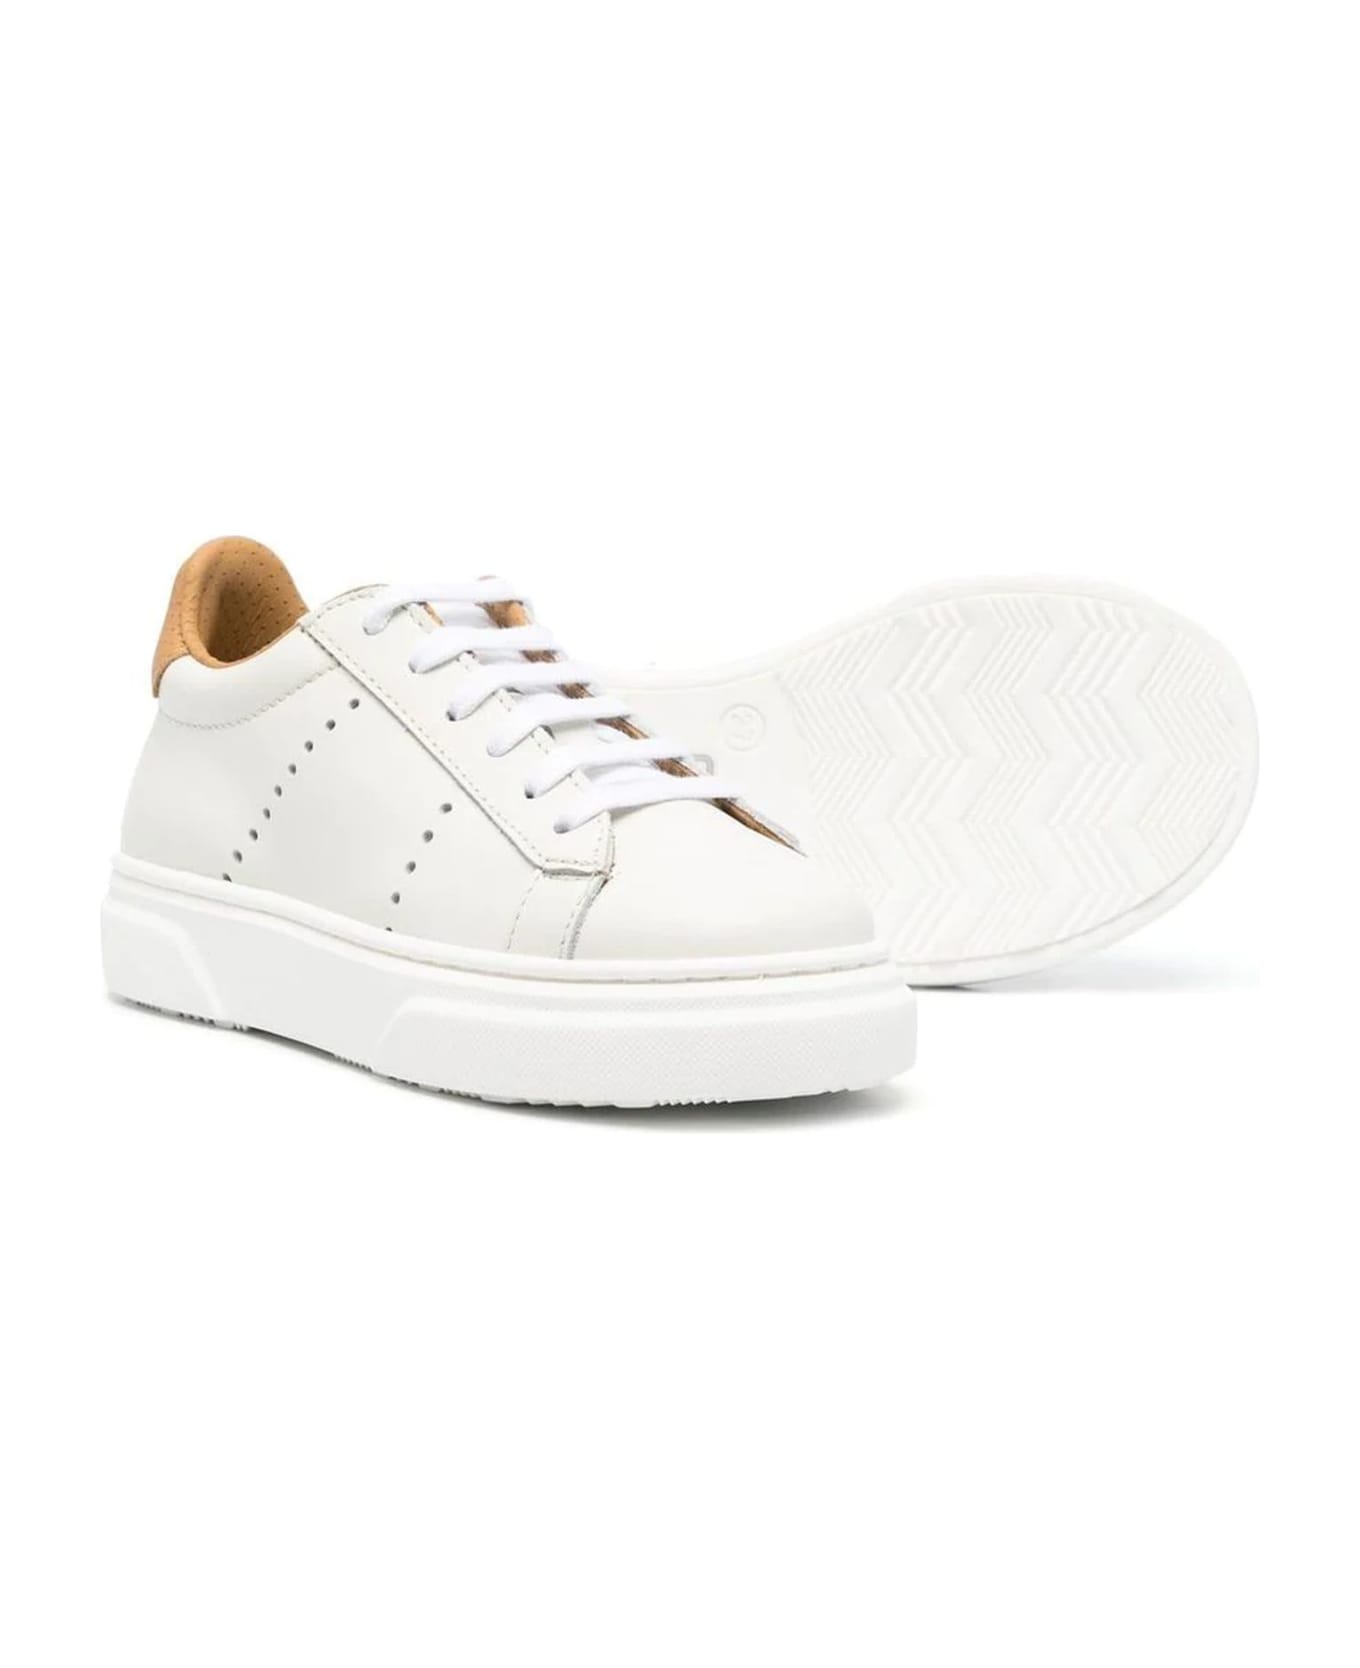 Eleventy White Leather Sneakers - Beige